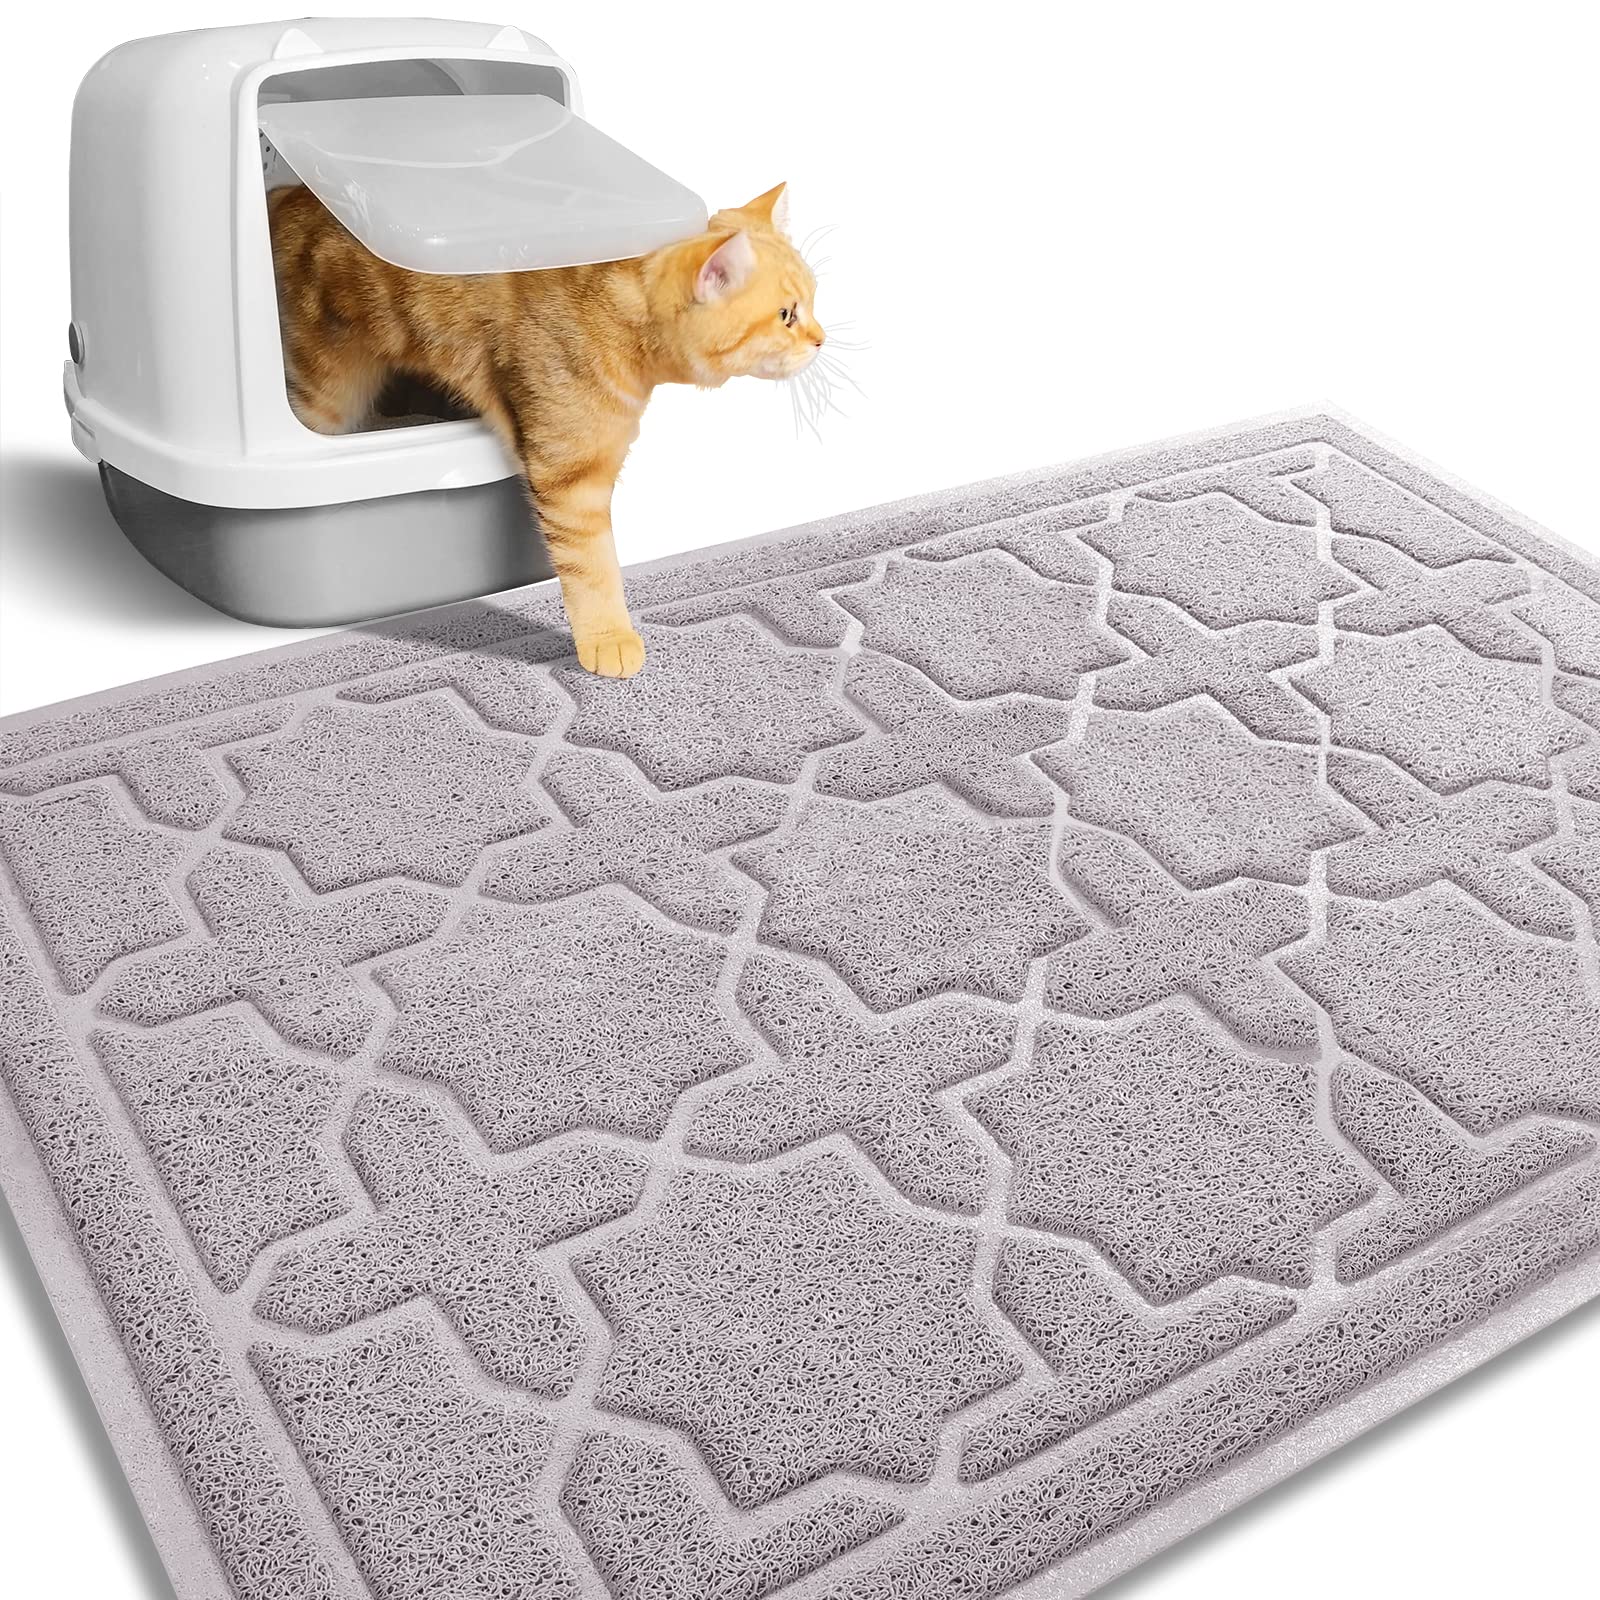 Yimobra Cat Litter Mat, 35.4x23.6 Litter Box Mat with Litter Lock Mesh, Soft Durable Cat Litter Mat Litter Trapping Mat, Easy to Clean, Non-Slip, Wate